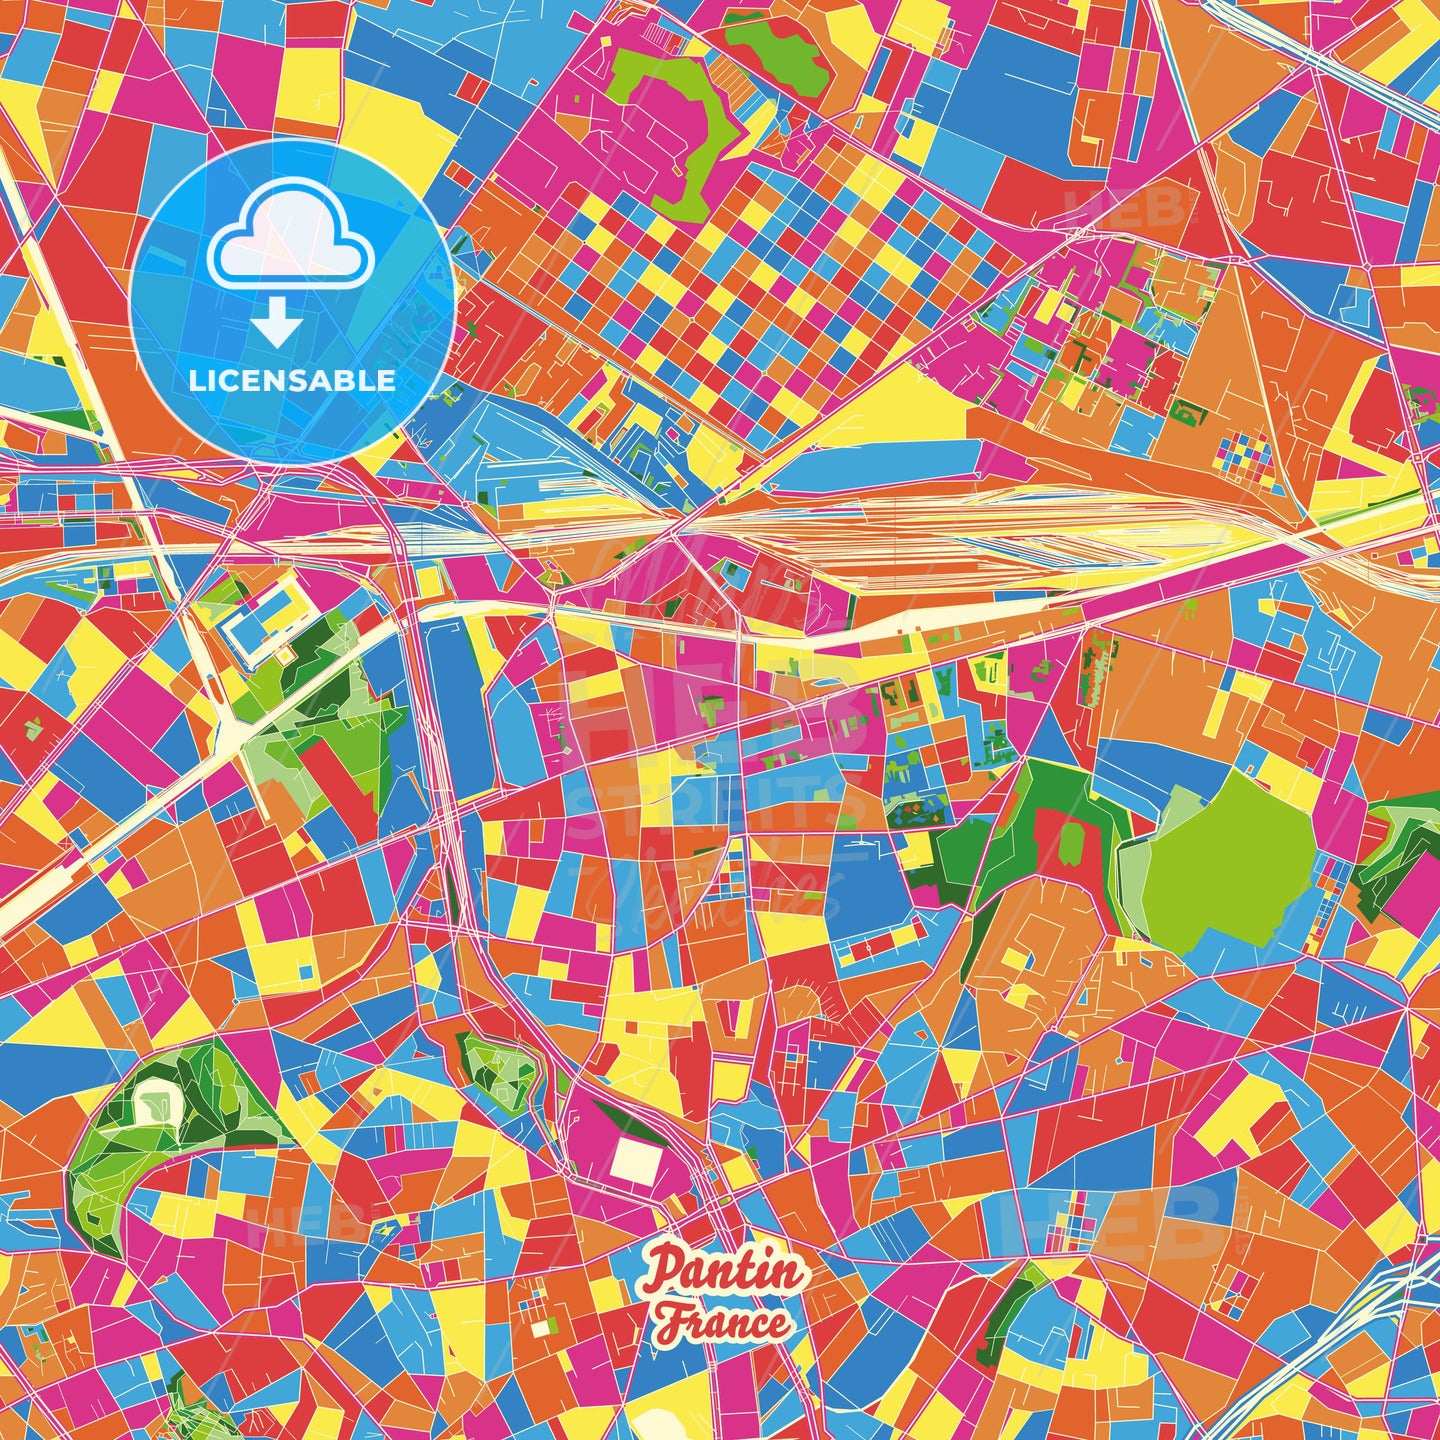 Pantin, France Crazy Colorful Street Map Poster Template - HEBSTREITS Sketches